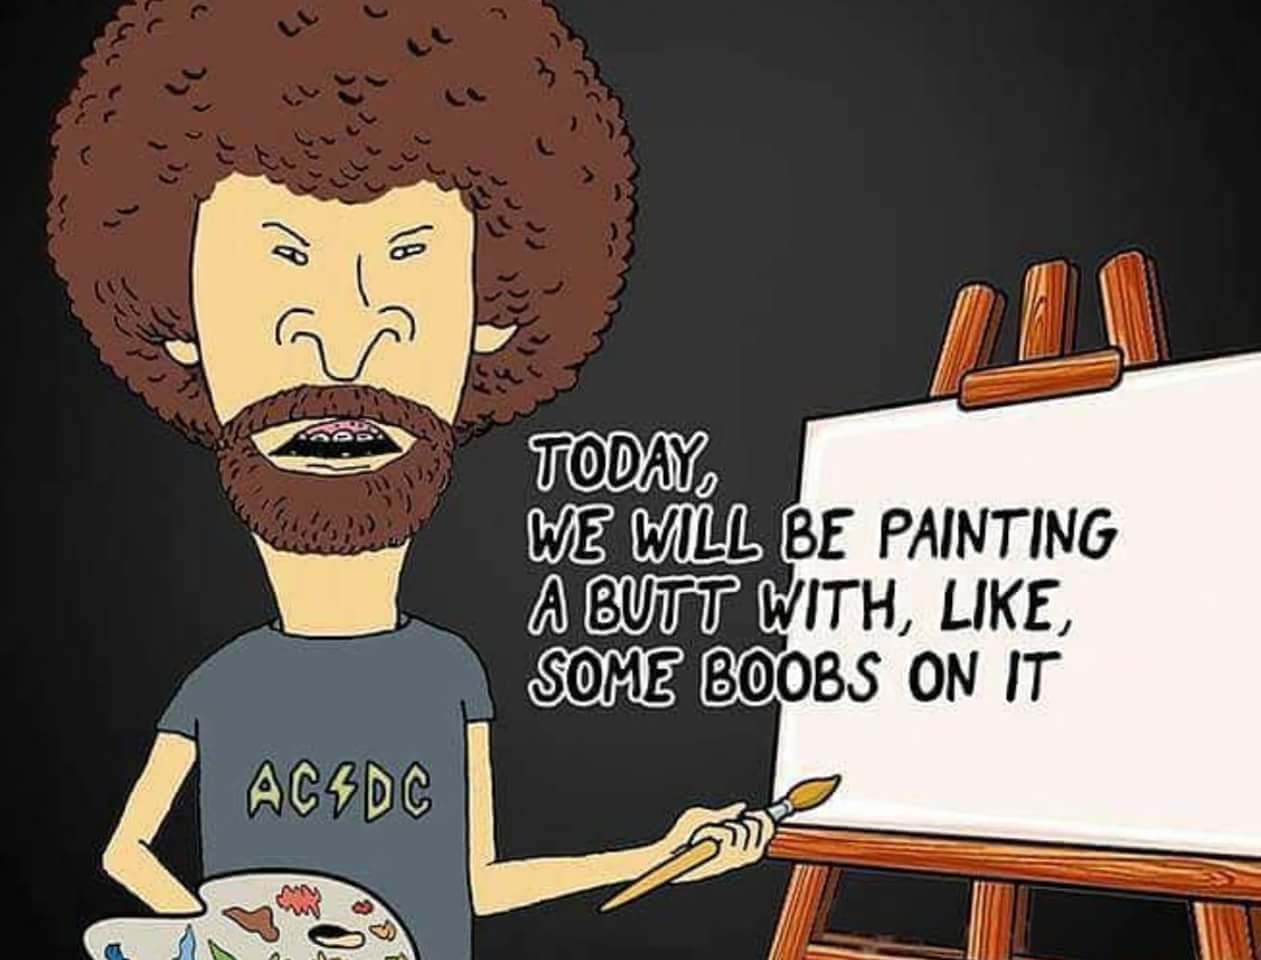 beavis and butthead bob ross - Cell Today We Will Be Painting A Butt With, , Some Boobs On It Acsdc